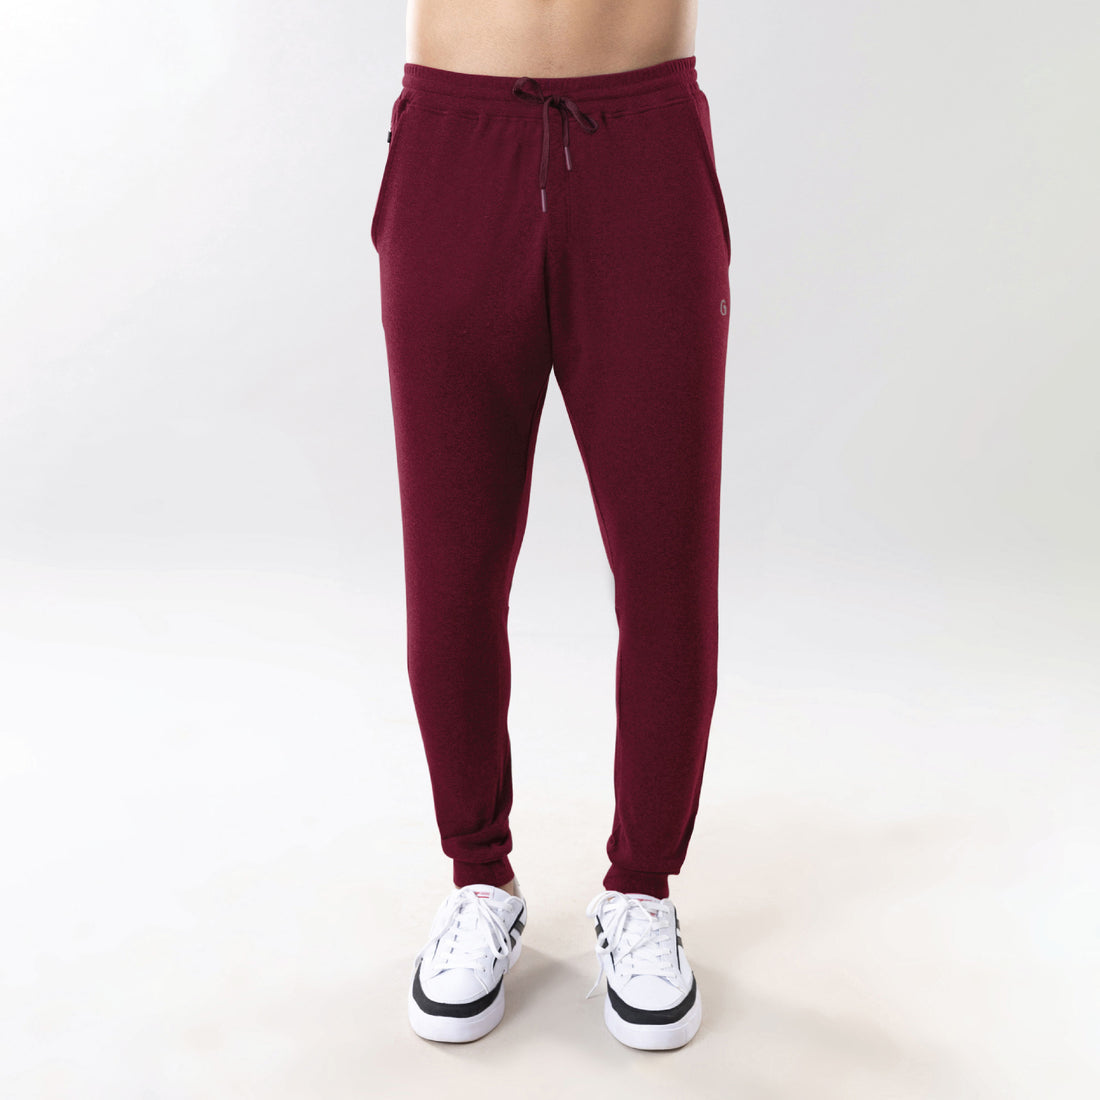 Affordable Wholesale nike sweat pants For Trendsetting Looks 